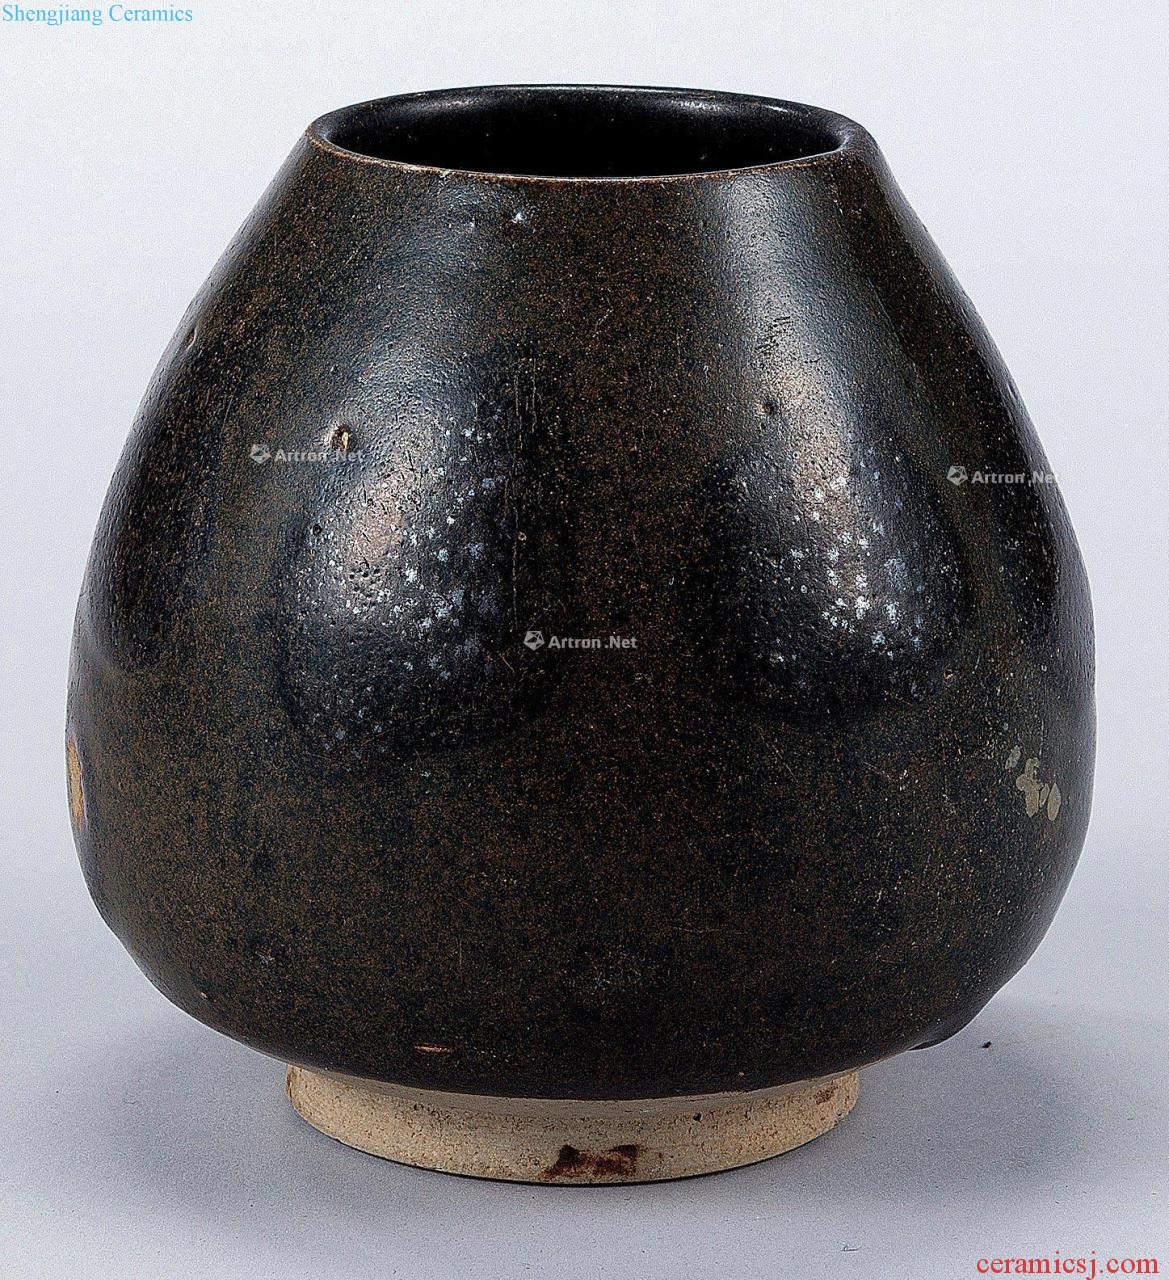 The song dynasty Henan temmoku oil chicken heart cans